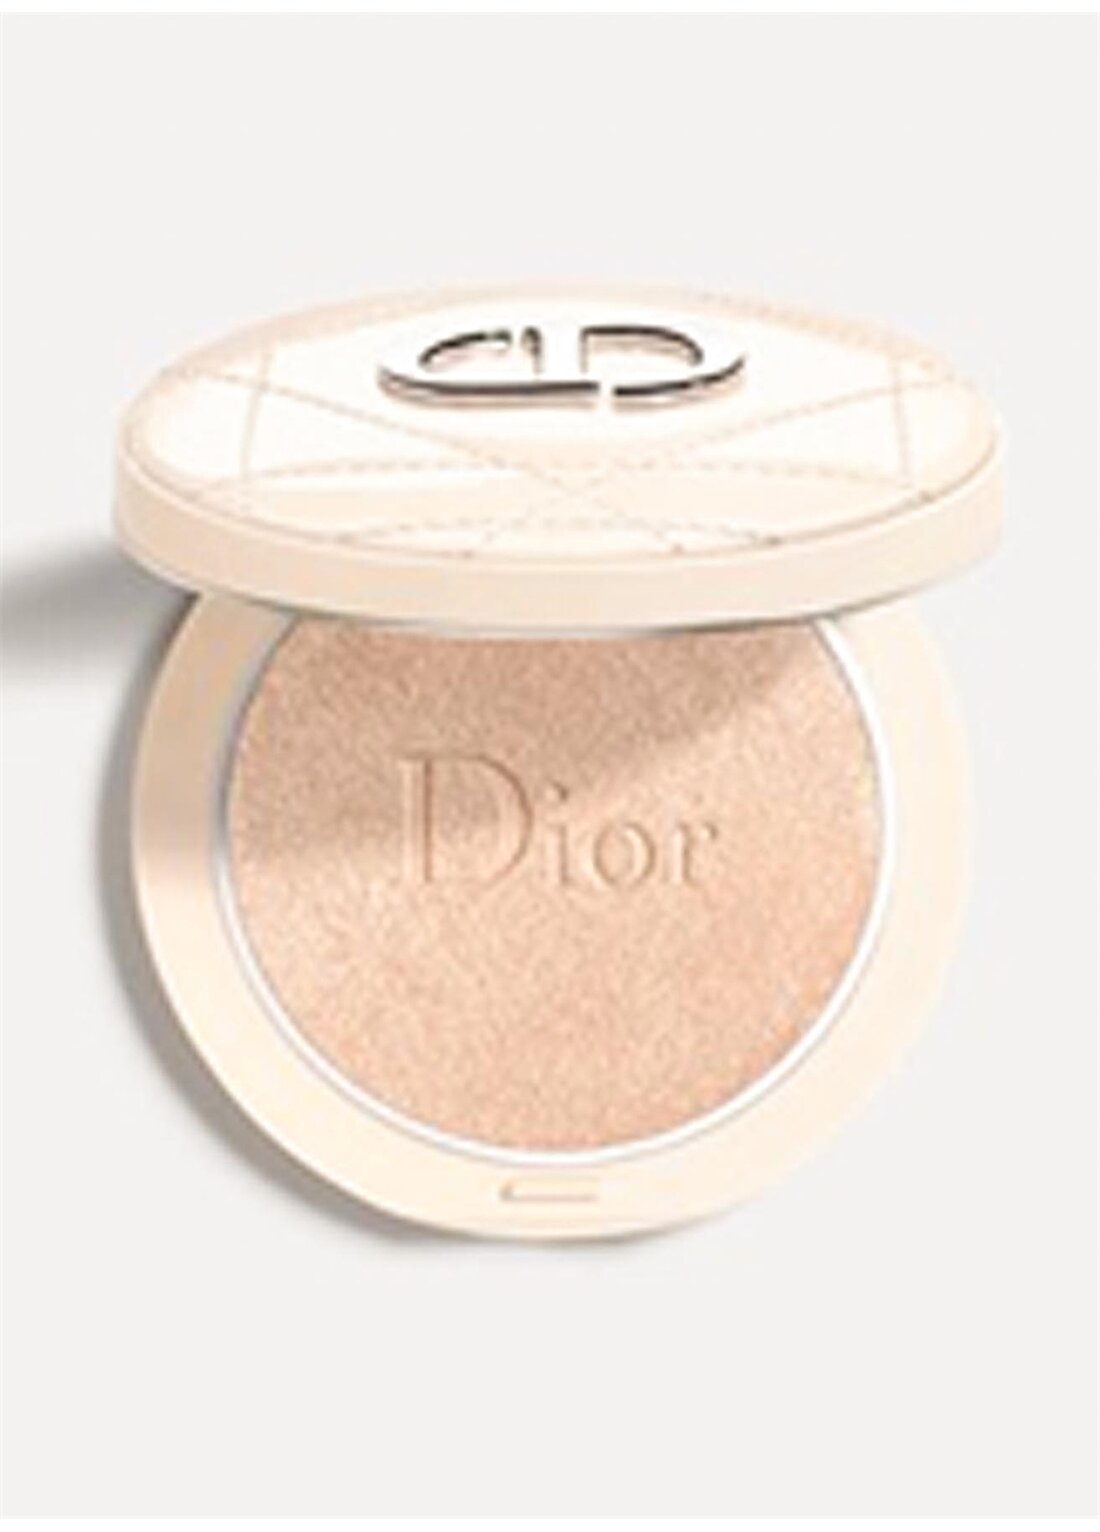 Dior Forever Couture Luminizer Highlighter 01 Nude Glow